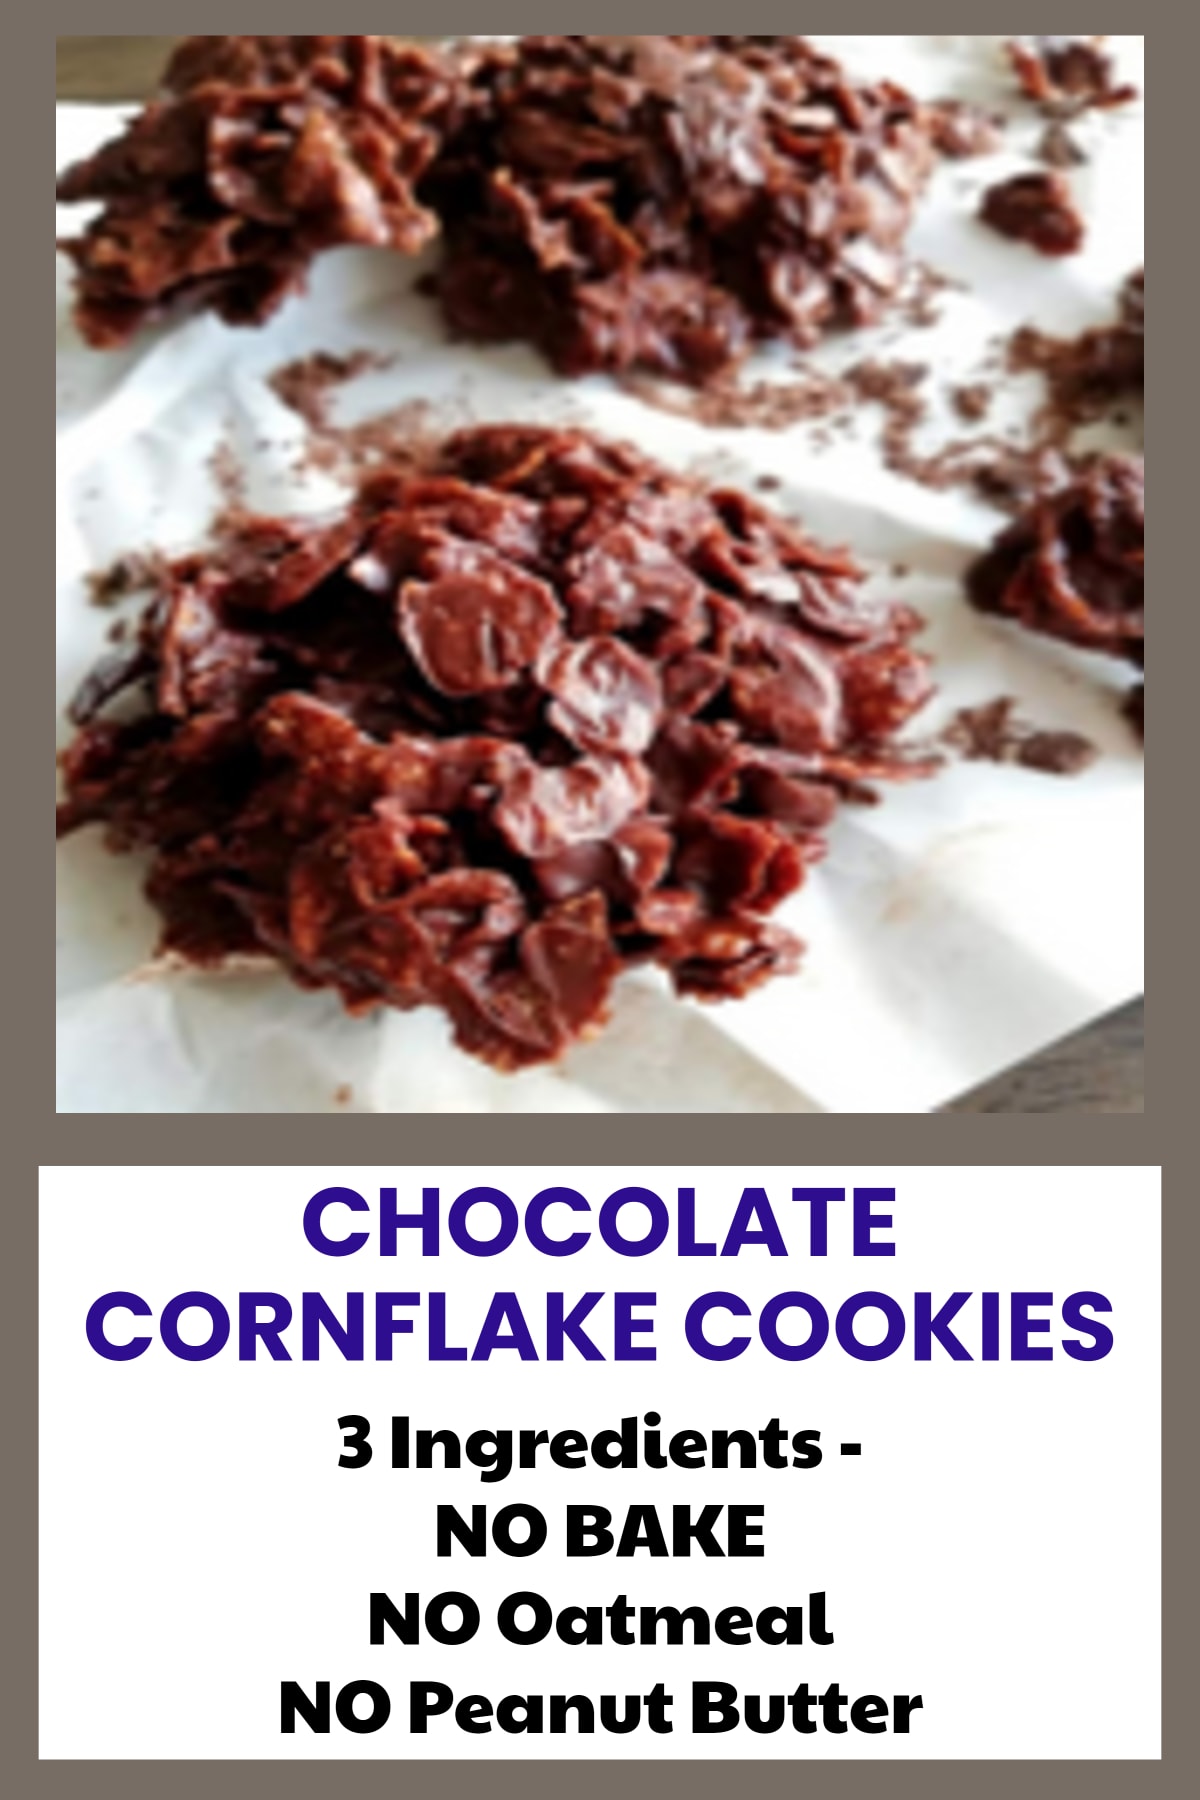 Chocolate Cornflakes Cookies - No bake, 3 ingredients, no oatmeal, no peanut butter